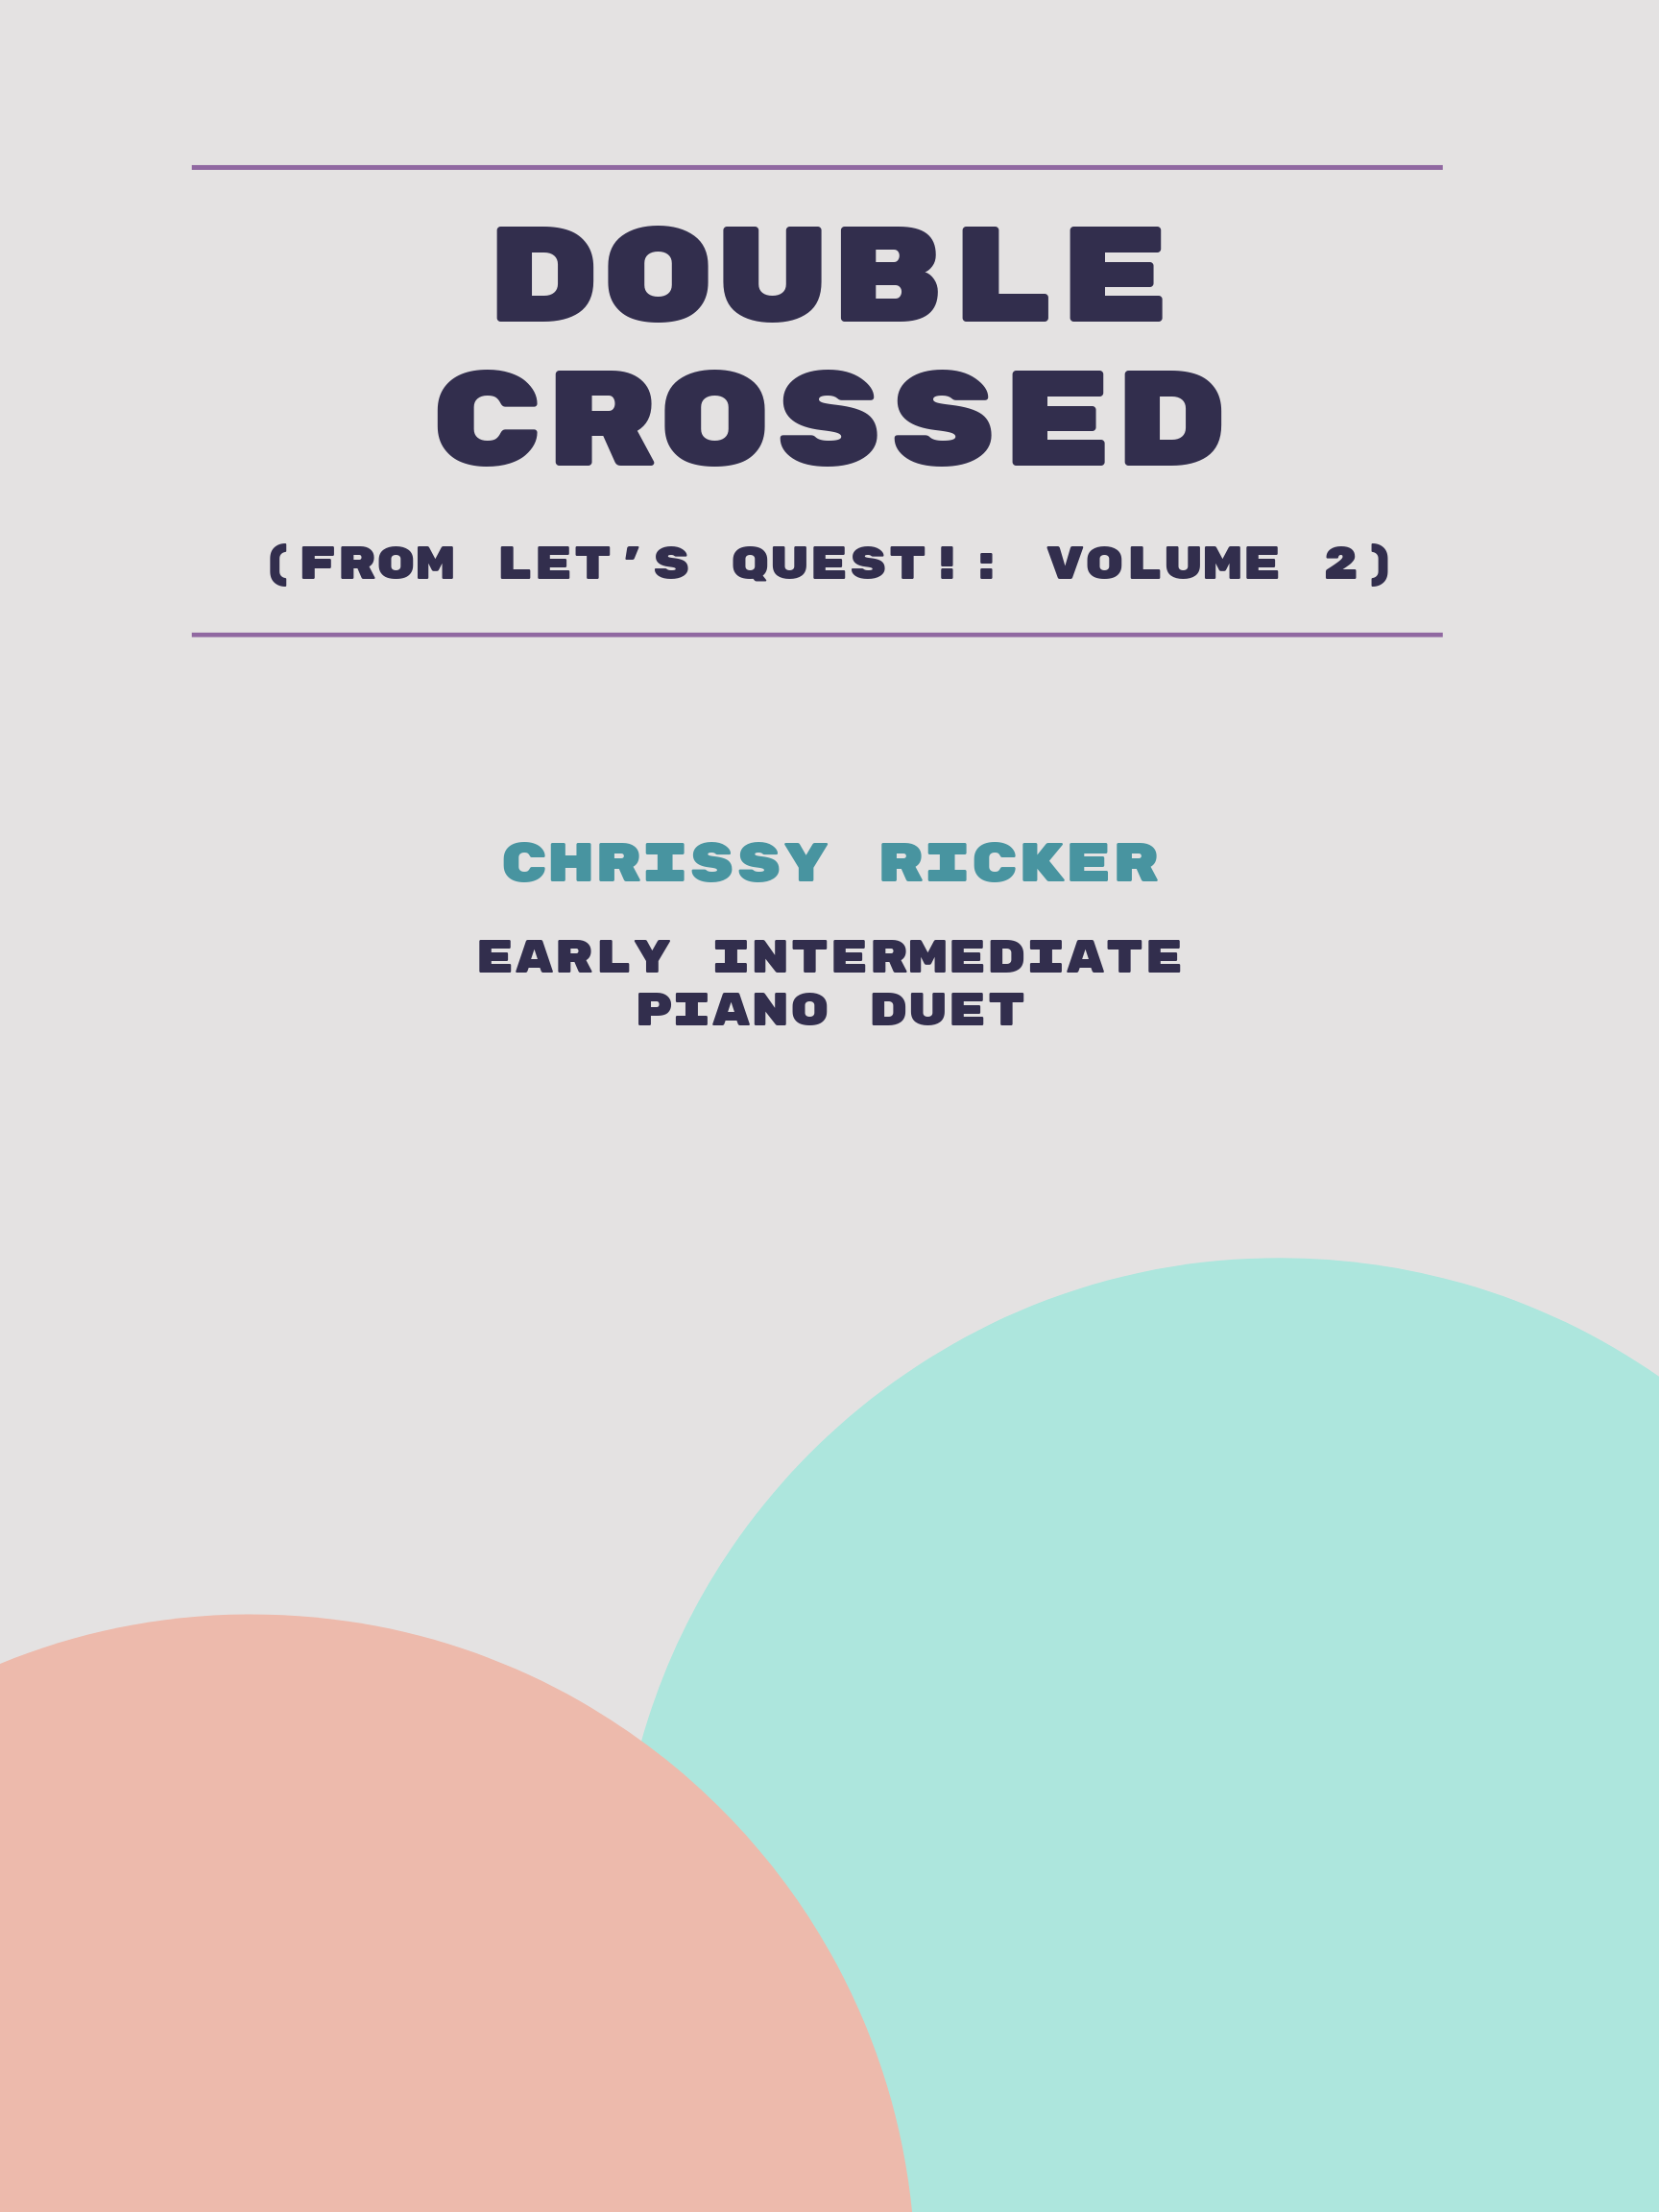 Double Crossed by Chrissy Ricker